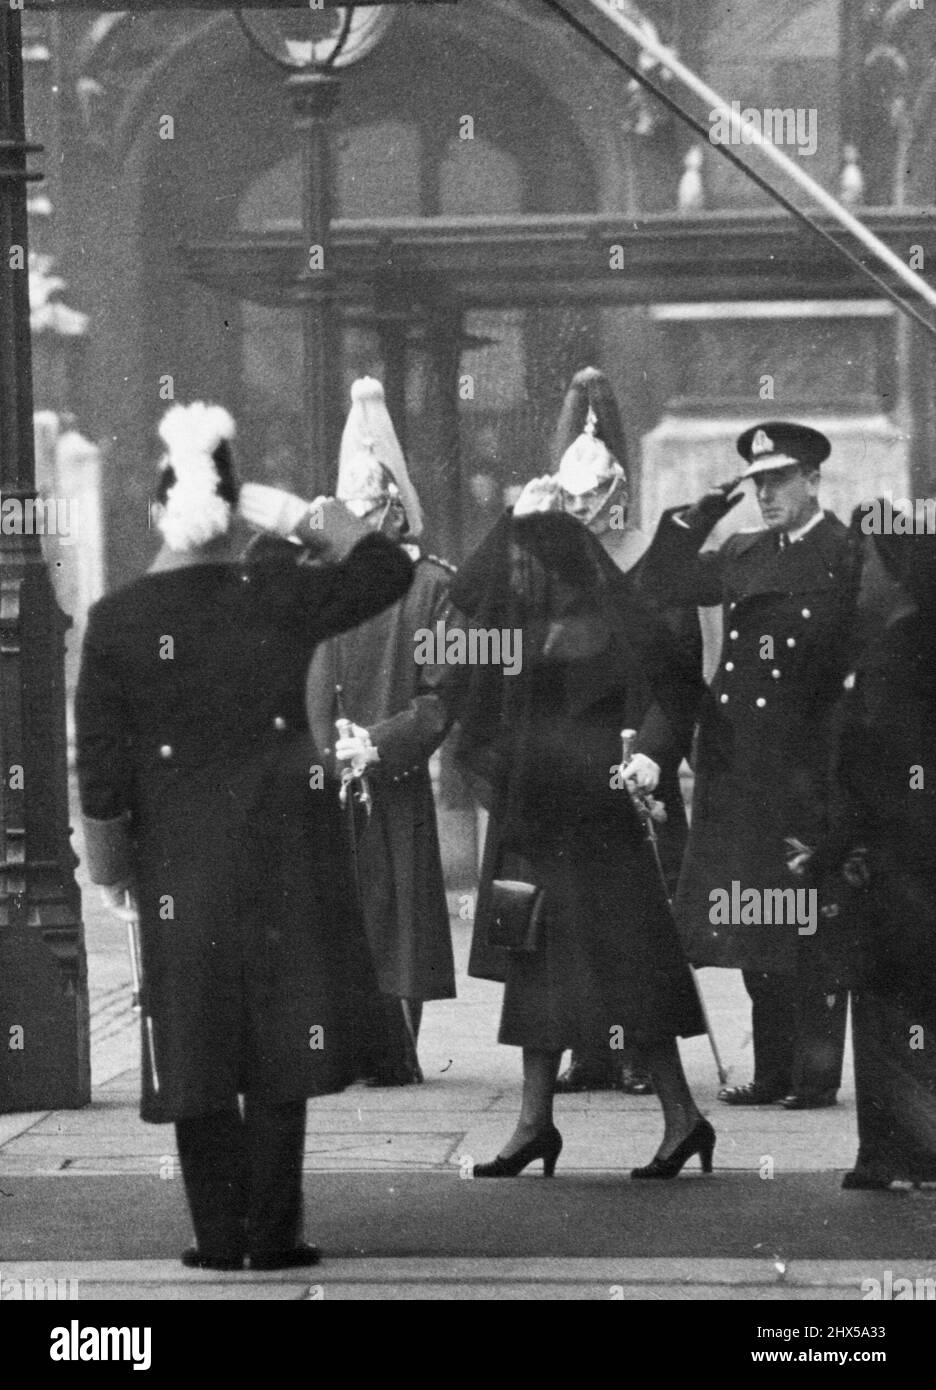 Royal Funeral: Queens at Westminster Hall - The Queen and the Queen Mother walking to their carriage at Westminster Hall. Saluting on right is seen. Earl Mount Batten(in naval uniform). Sorrowing London bade farewell to King George VI to-day (Friday). When his funeral cortege passed from Westminster Hall to Paddington Station, where the coffin was entrained for Windsor. February 15, 1952. (Photo by Reuterphoto). Stock Photo